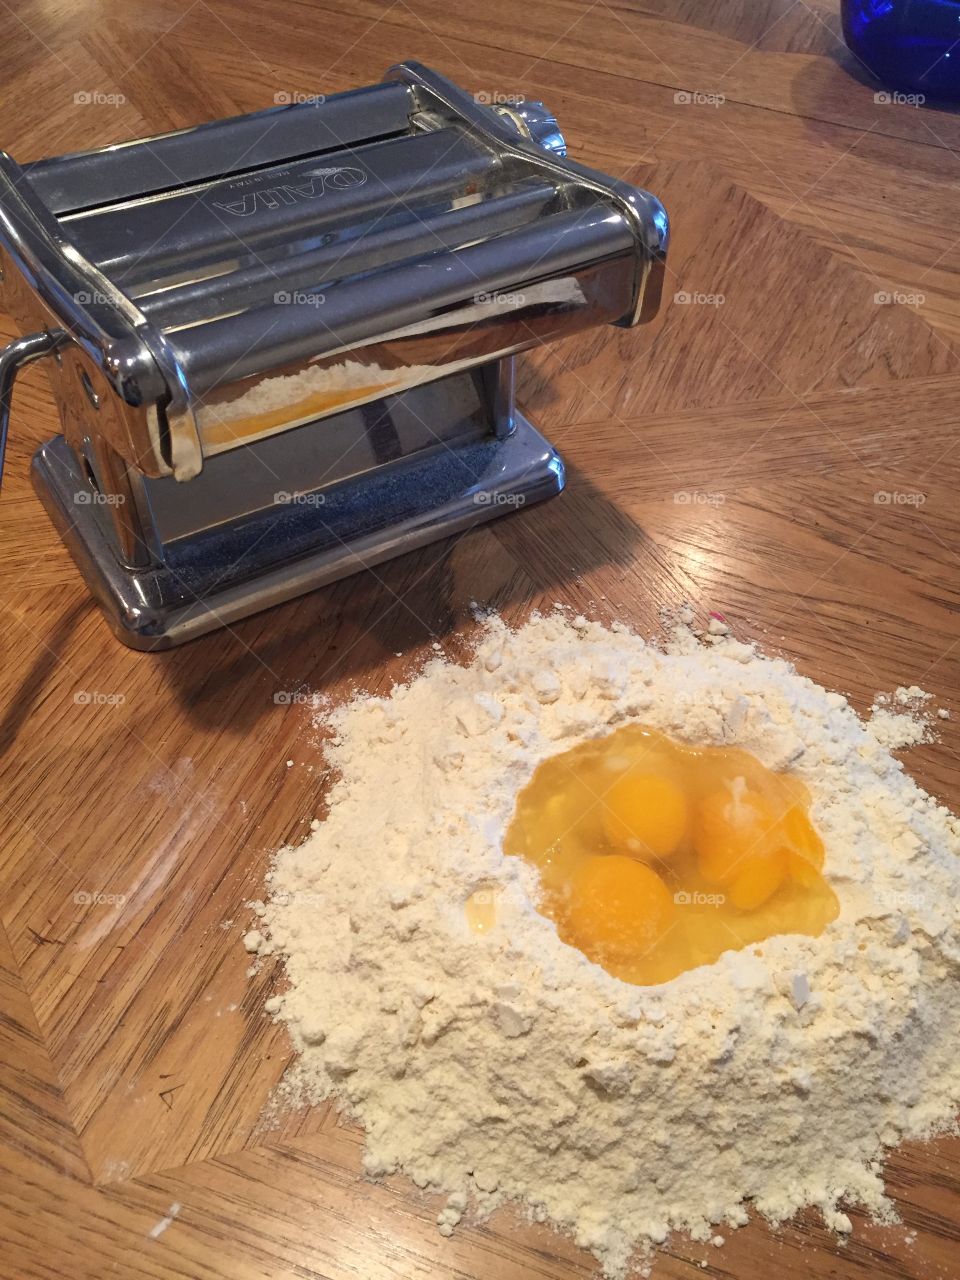 Get down and get messy! The best of the best homemade pasta!! Homemade pasta is a lot art!